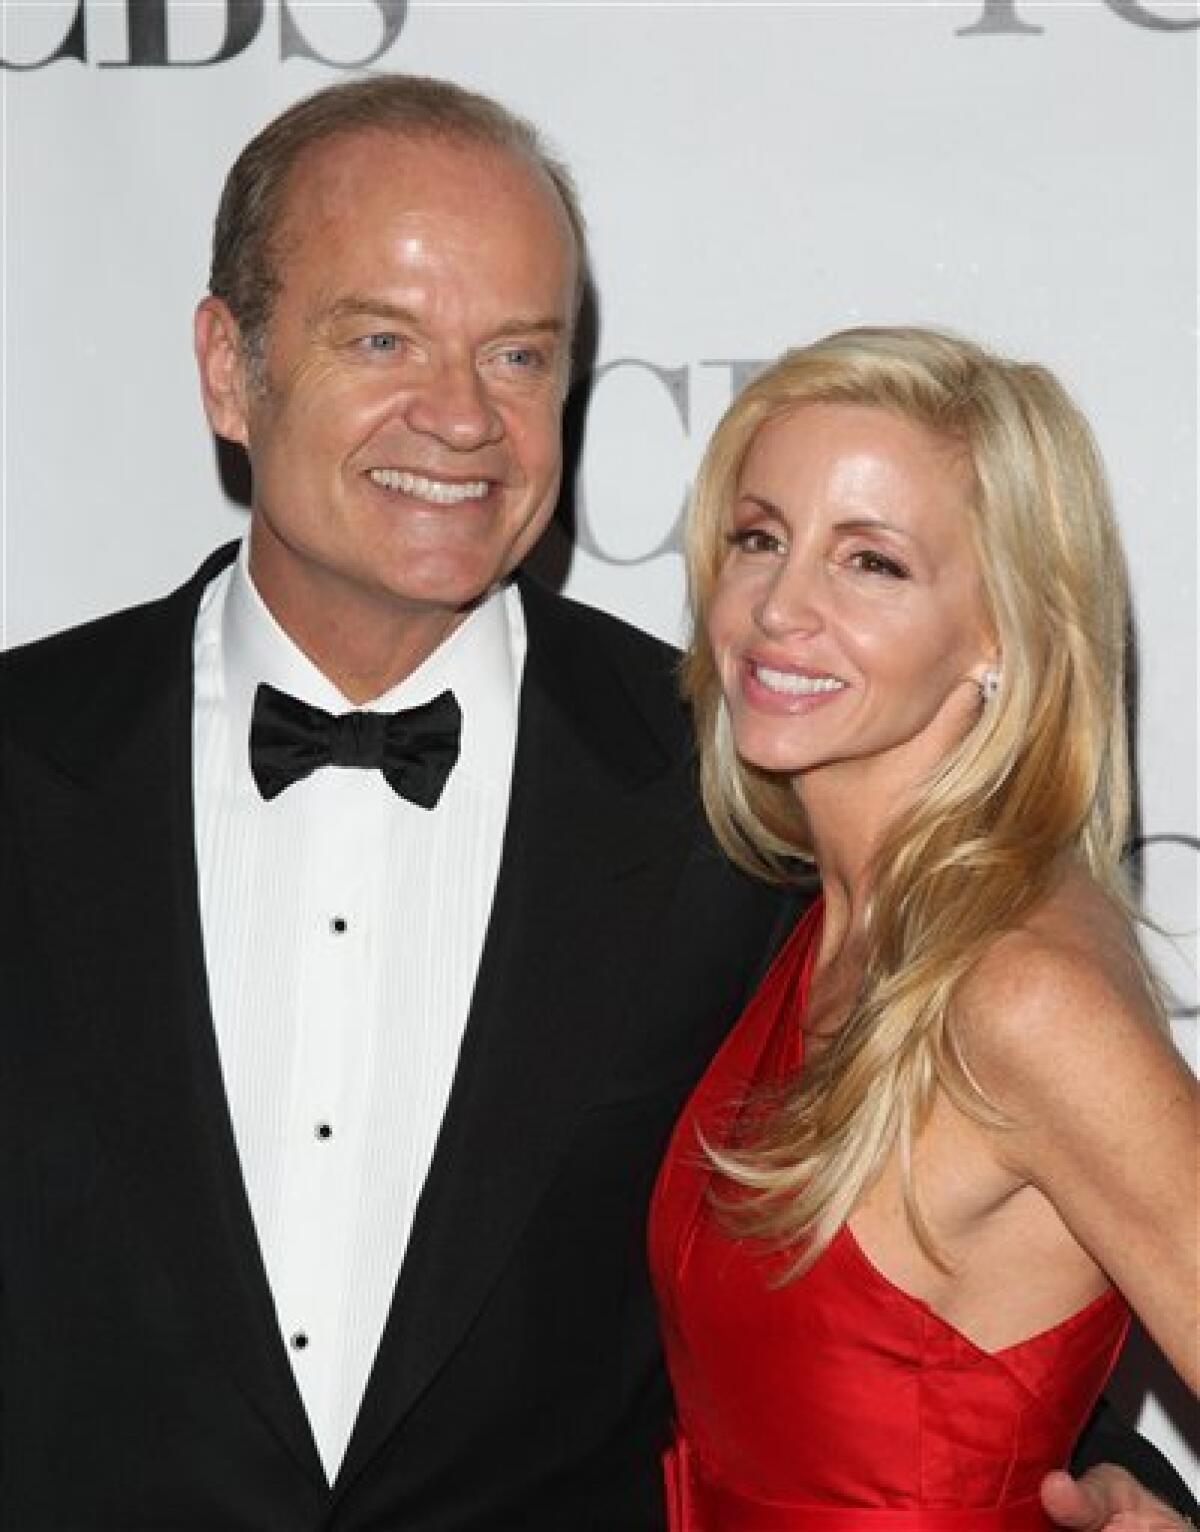 FILE - In this June 13, 2010 file photo, Kelsey Grammer and his wife Camille Grammer arrive at the 61st Annual Tony Awards in New York. (AP Photo/Peter Kramer, file)